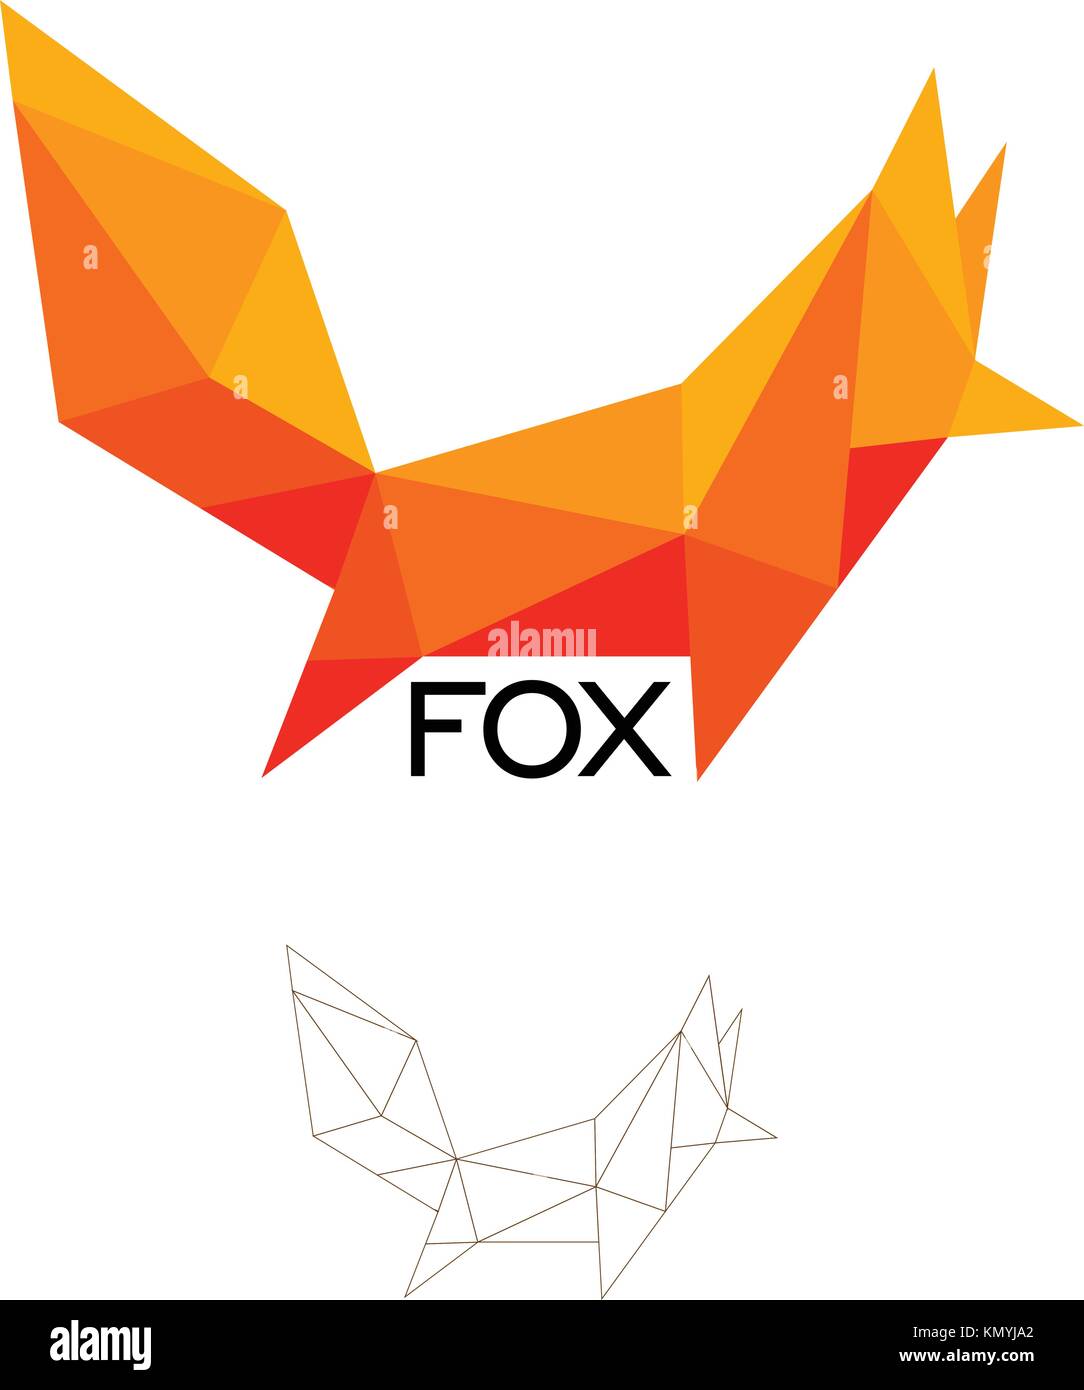 Fox geometrical sign, cat, dog abstract polygonal vector logo template. Origami orange color low poly wild animals icon. Stock Vector